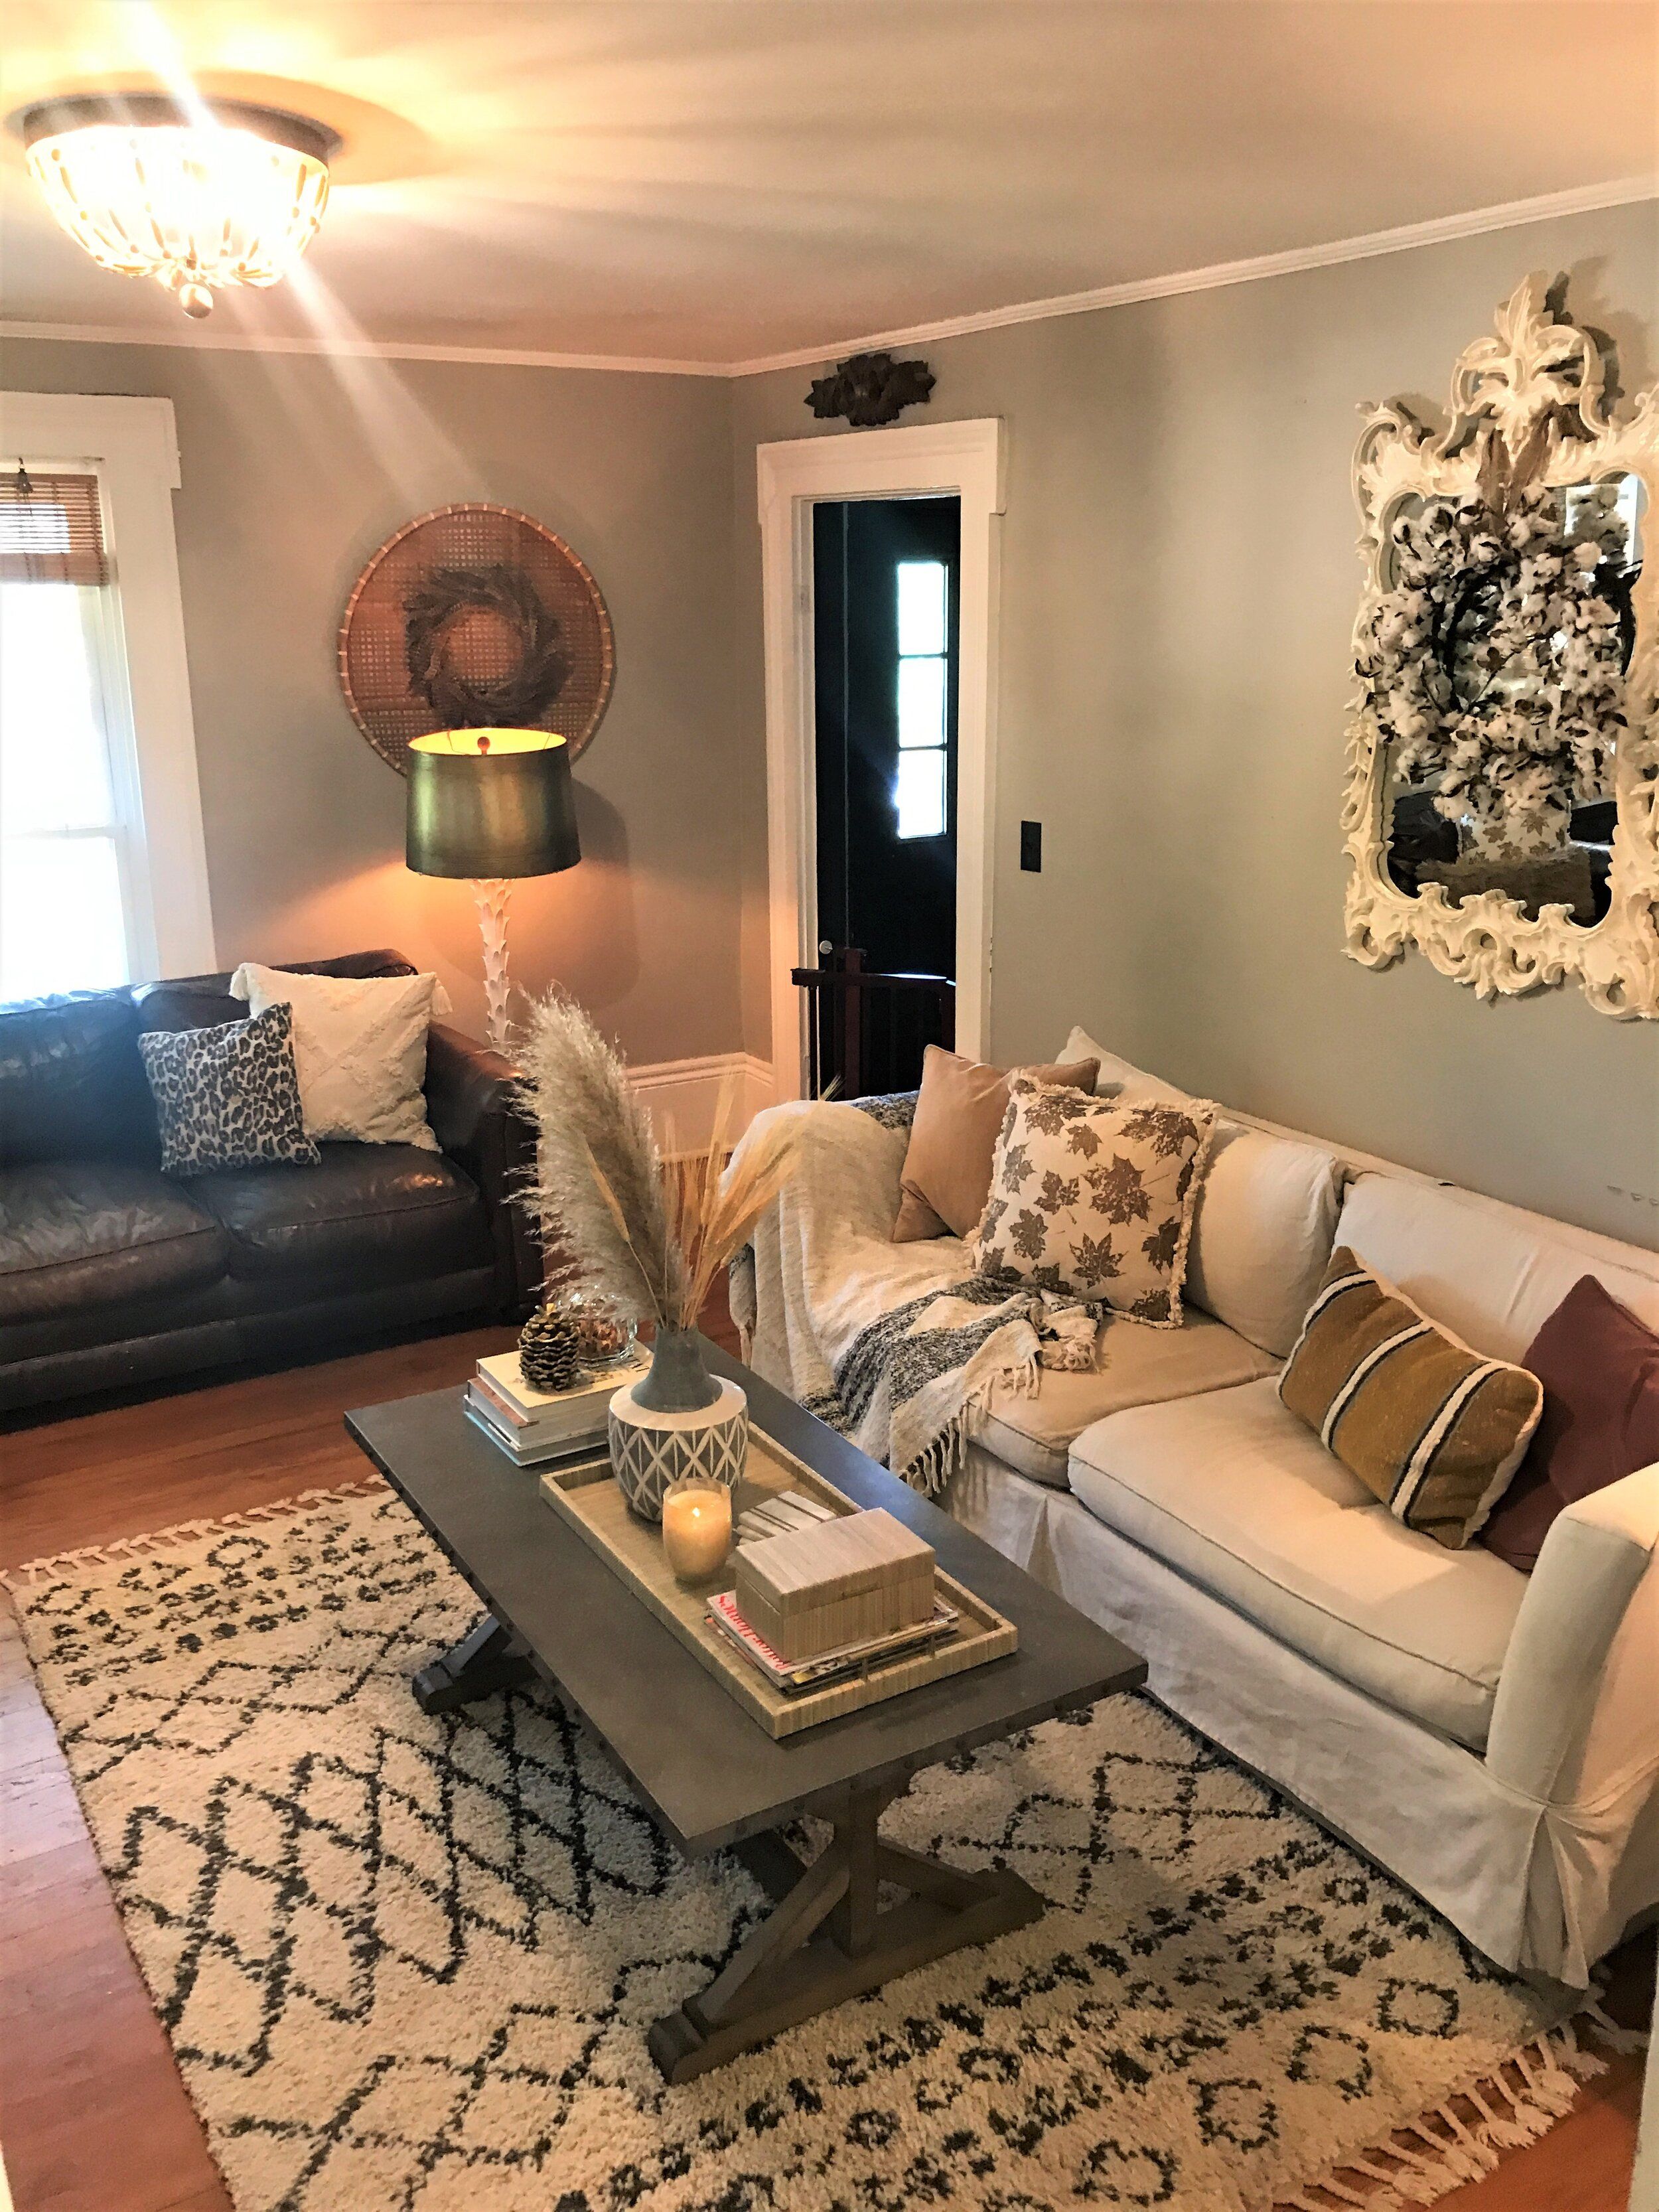 Warm And Welcoming: Creating A Cozy Fall Living Room